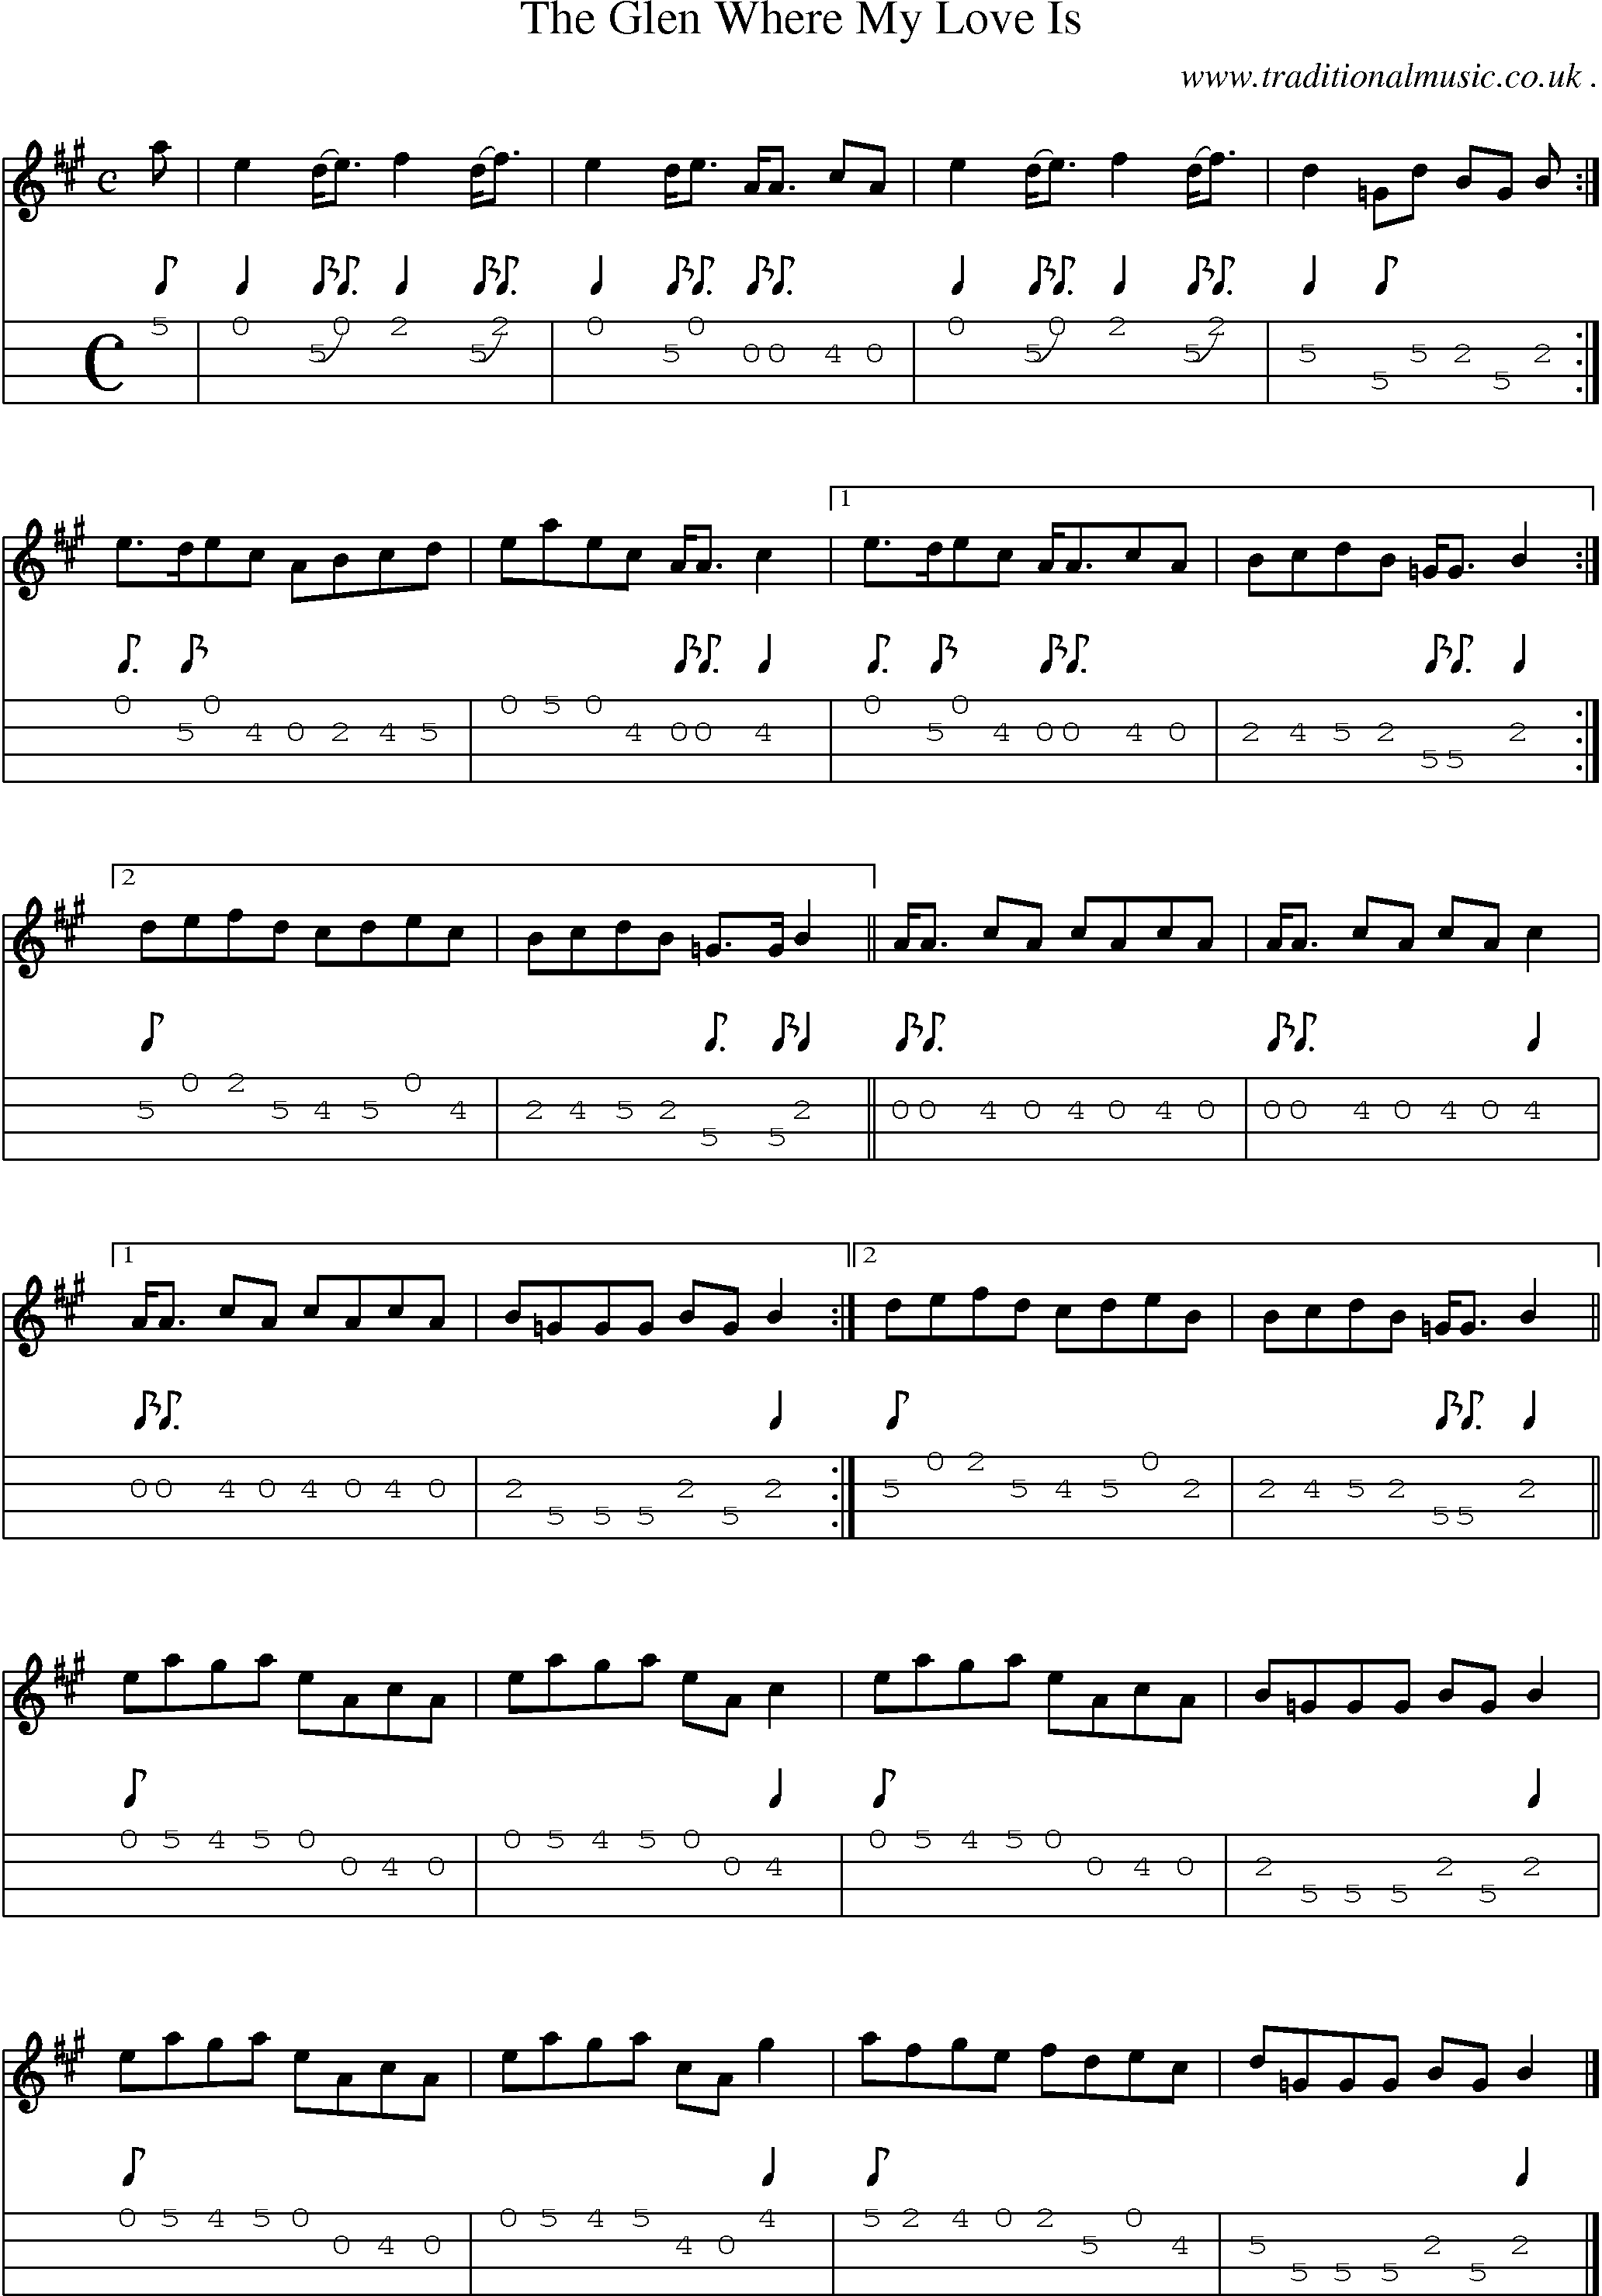 Sheet-music  score, Chords and Mandolin Tabs for The Glen Where My Love Is